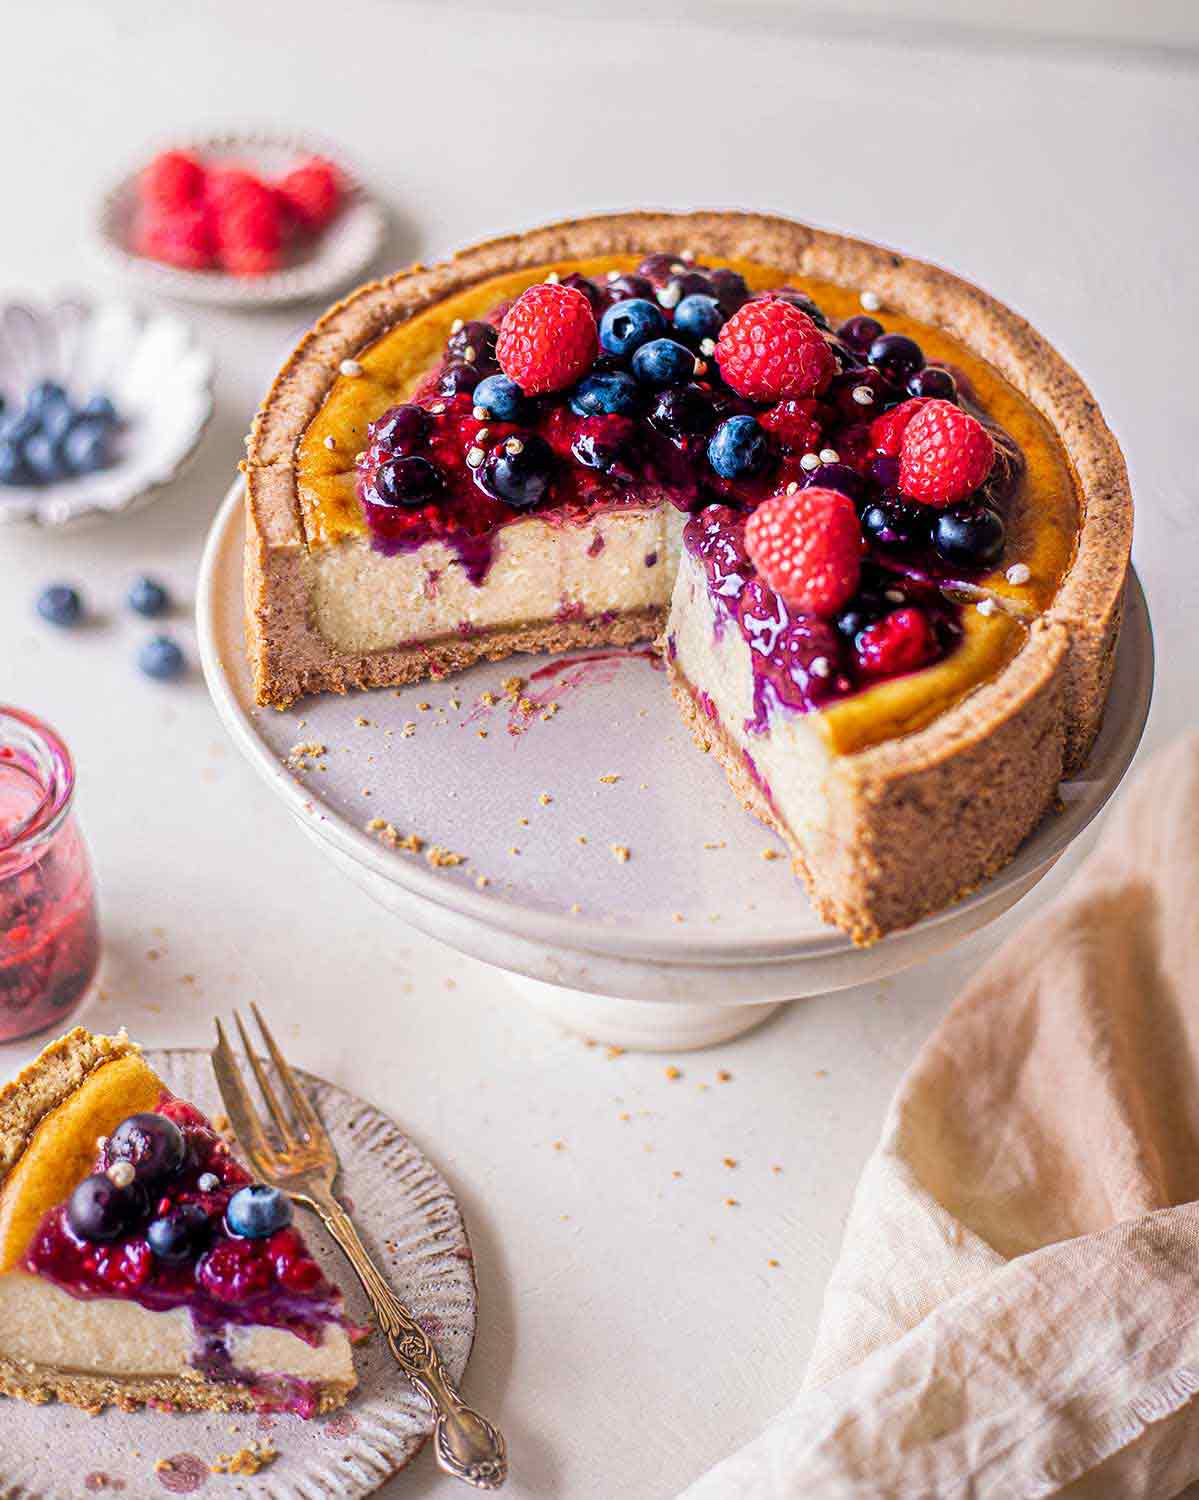 Healthy baked cheesecake (vegan) topped with berries on cake stand with cake slice in foreground.